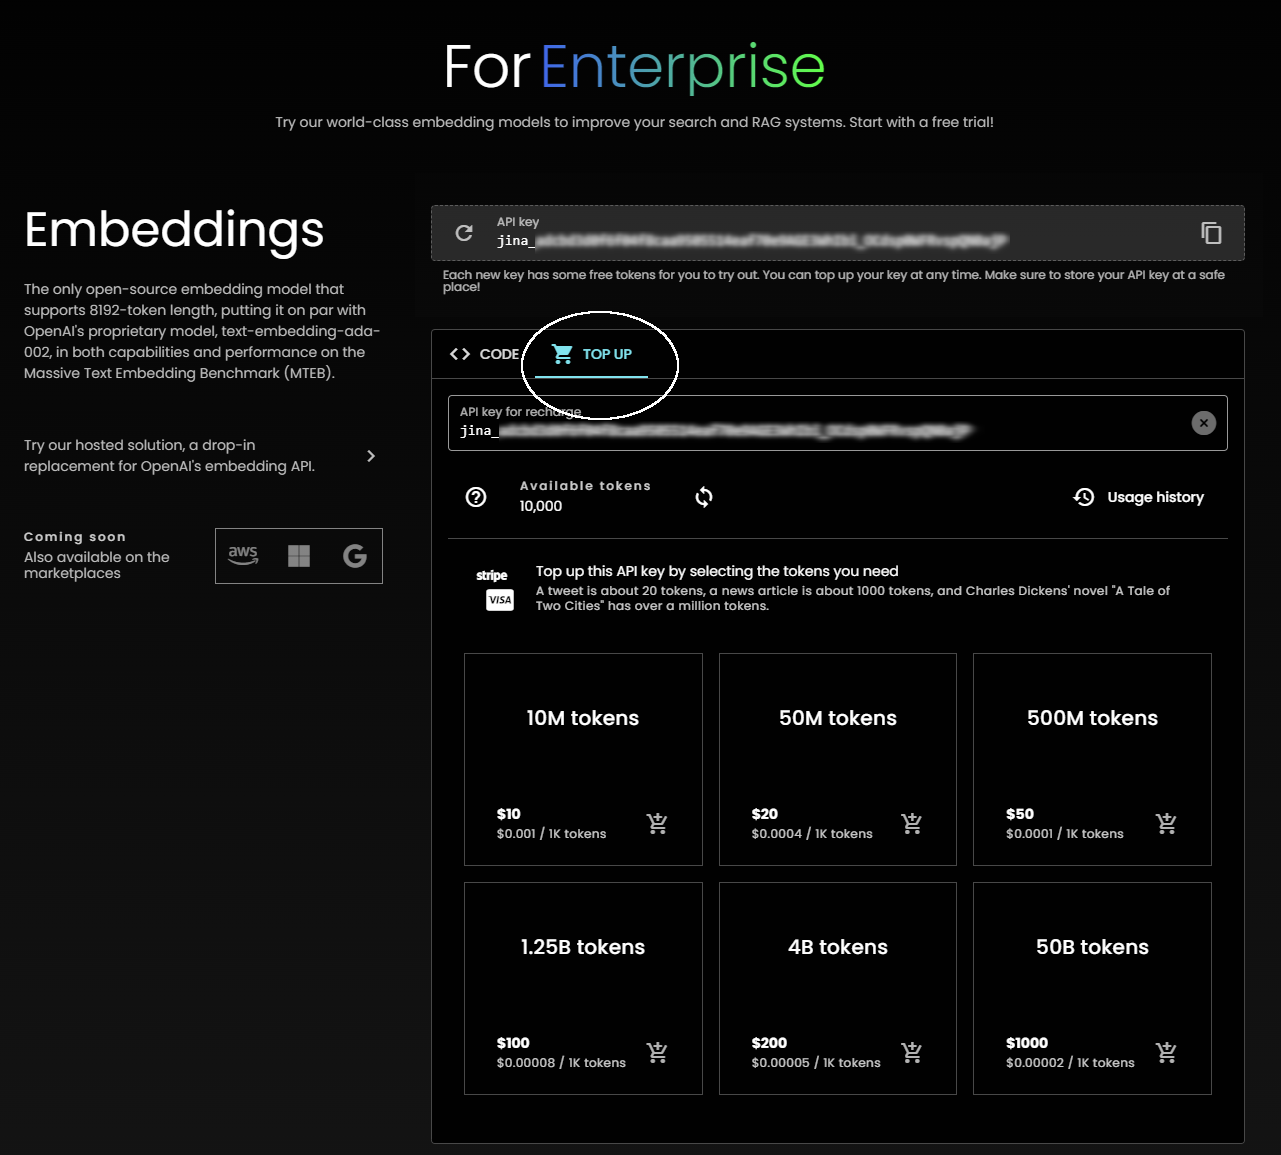 Web interface of For Enterprise embedding models offering token packages for search & RAG systems and pricing details